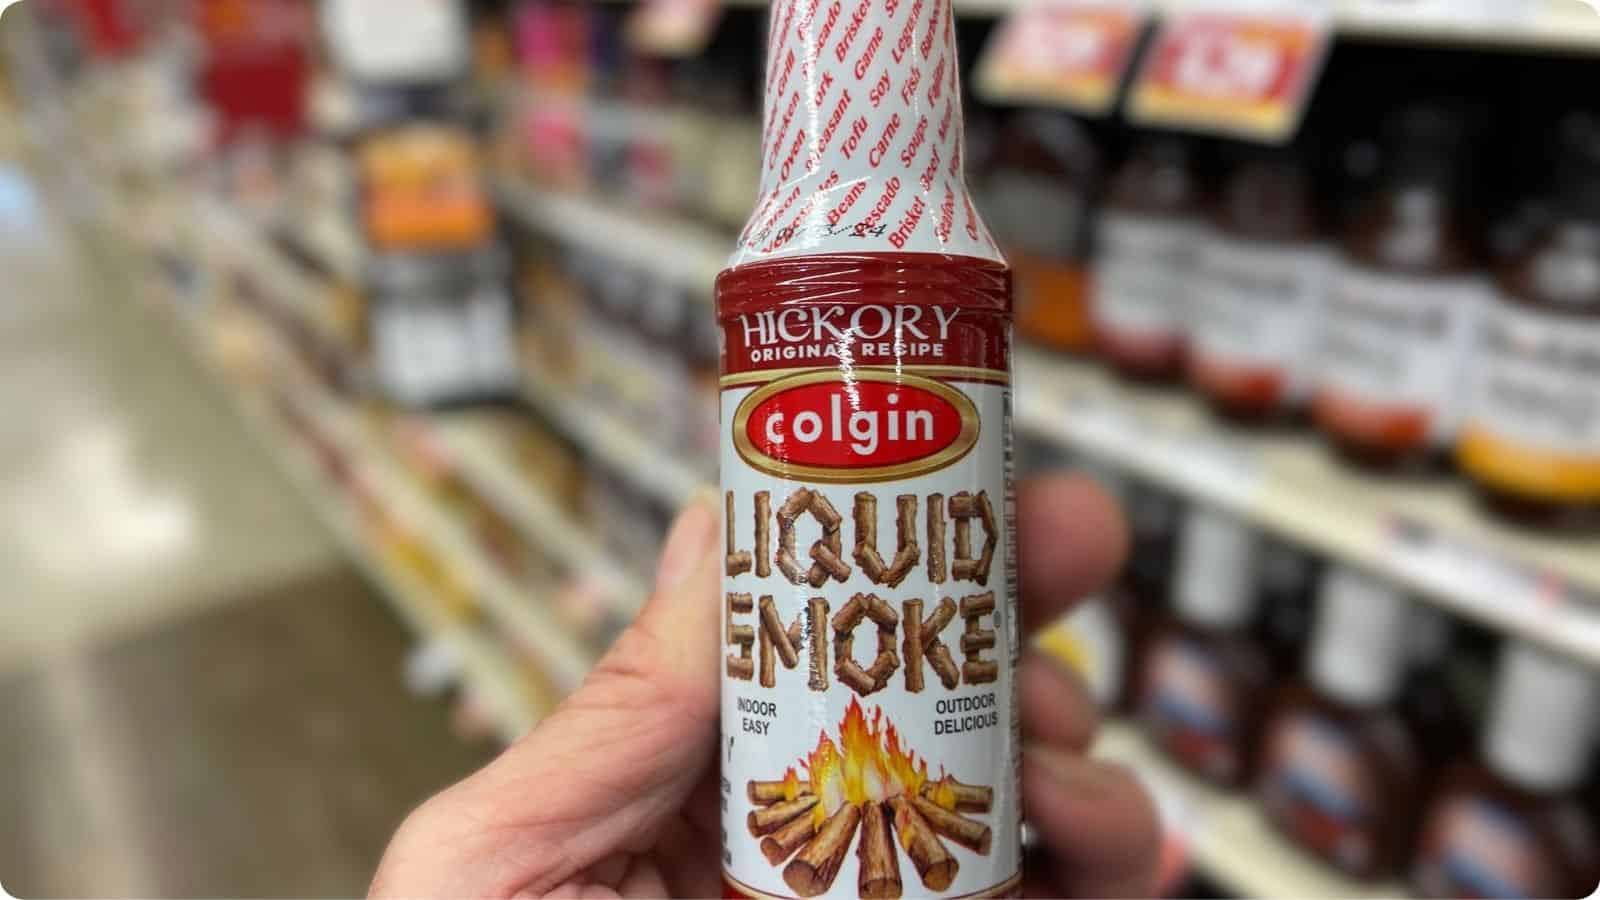 Close-up view of a hand holding a bottle of liquid smoke against a grocery store background.⁣